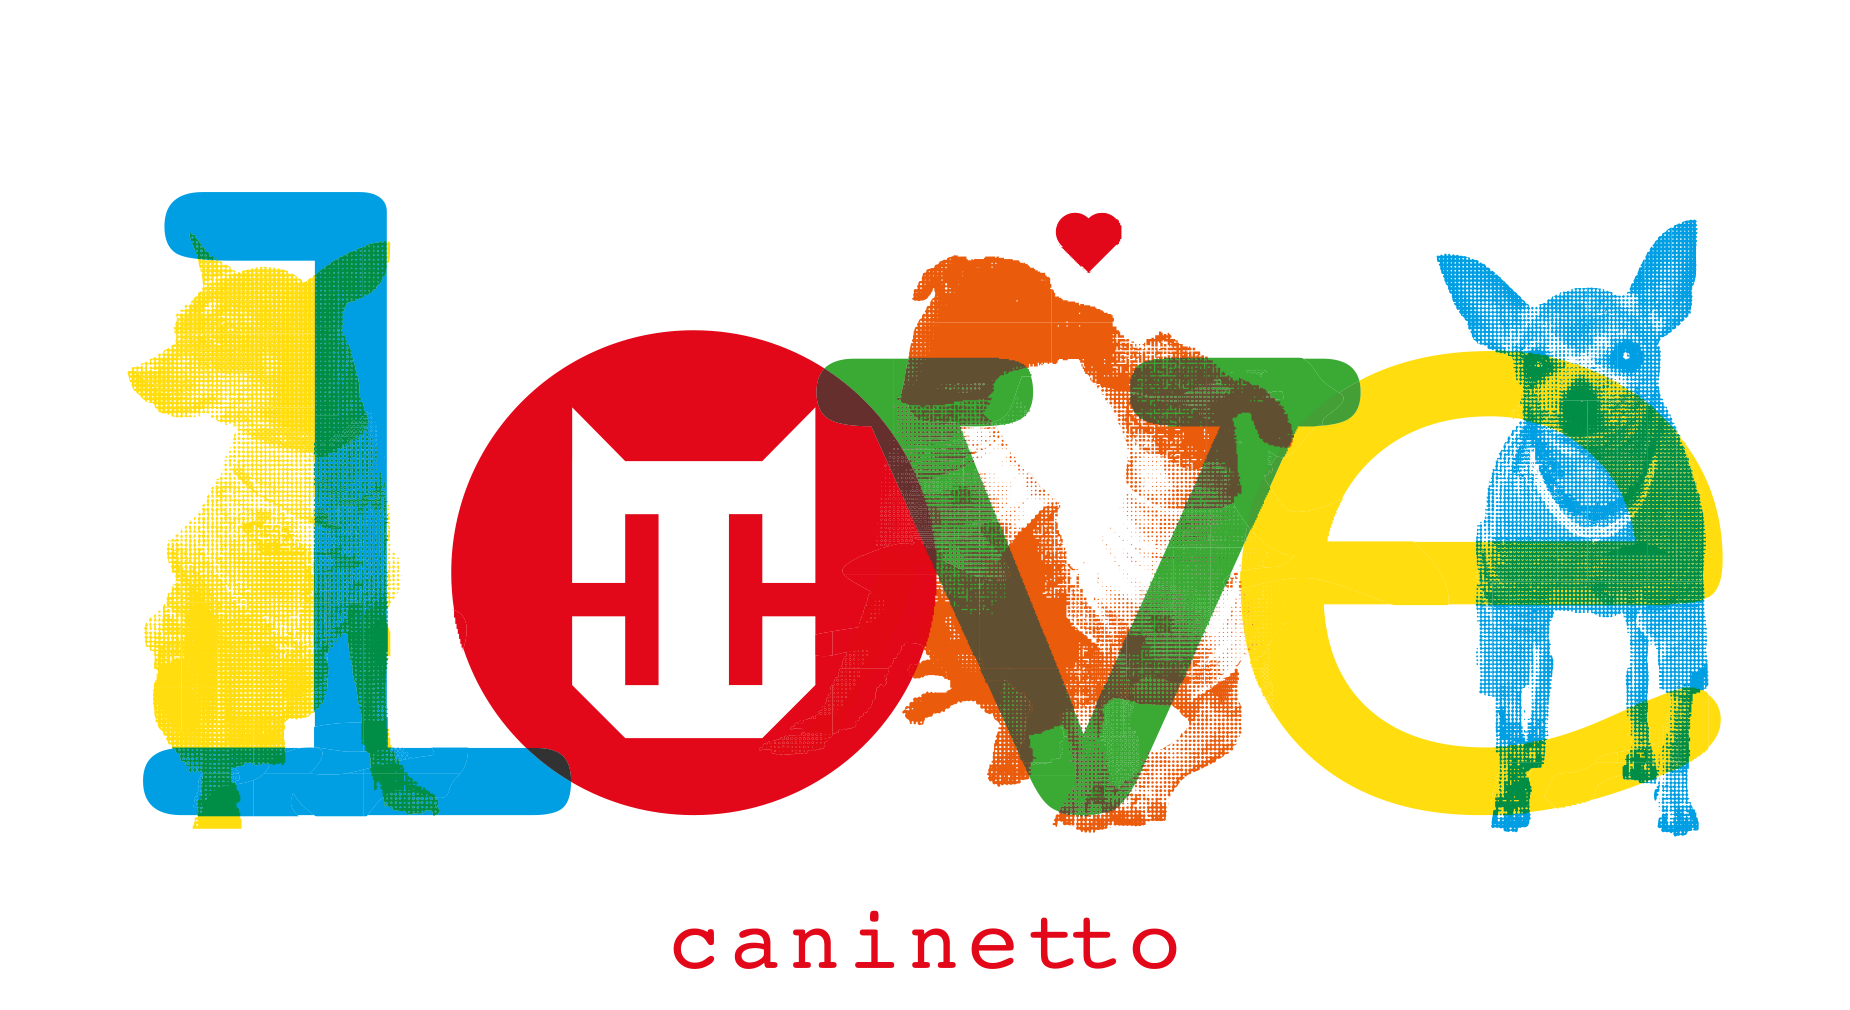 Caninetto